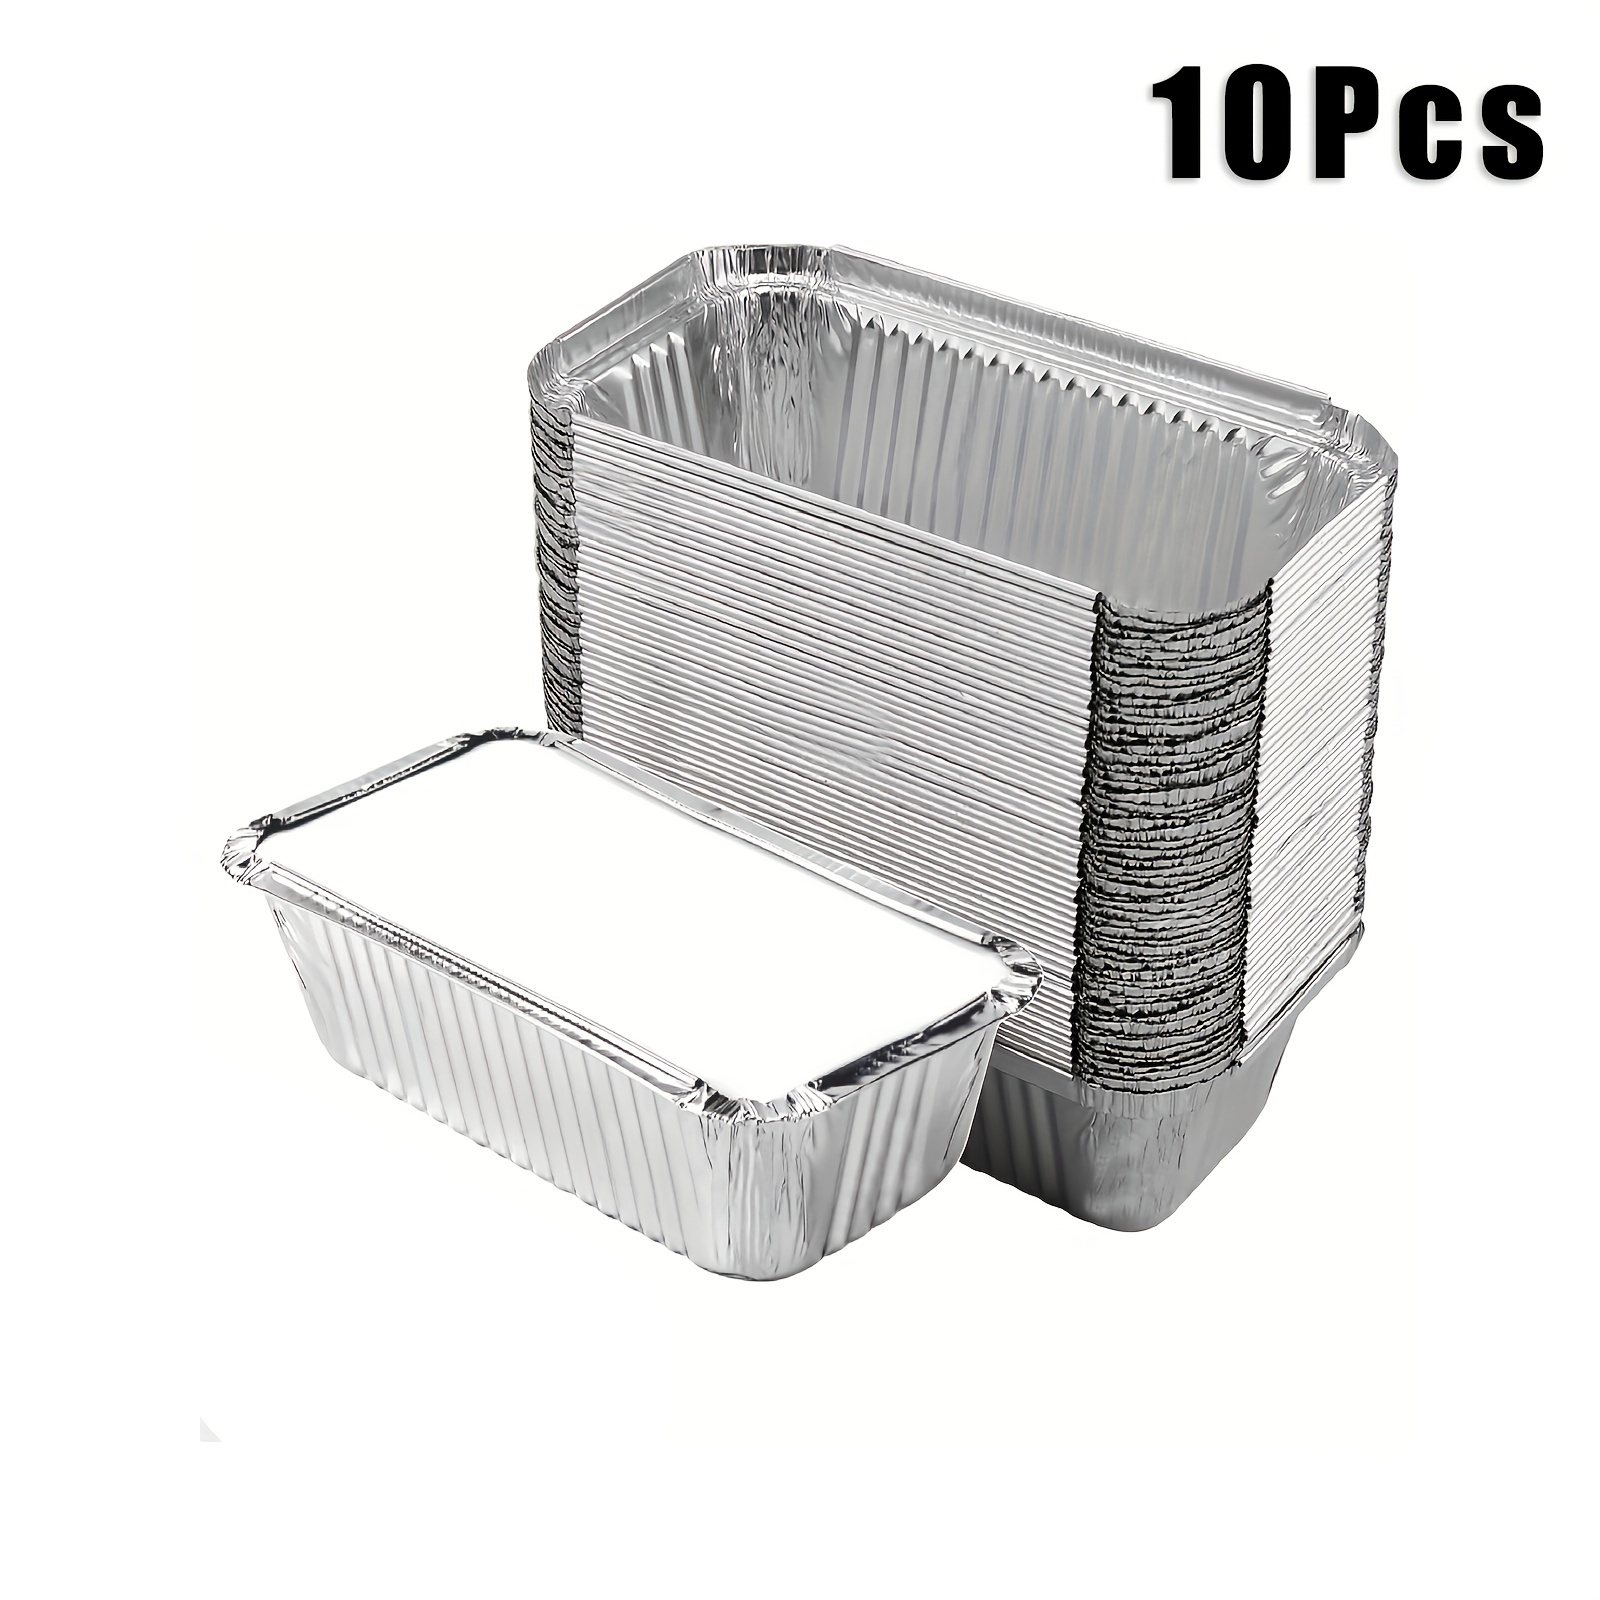 Kitchen Craft 3D STEAM TRAIN CAKE TIN baking pan mould from only £7.61